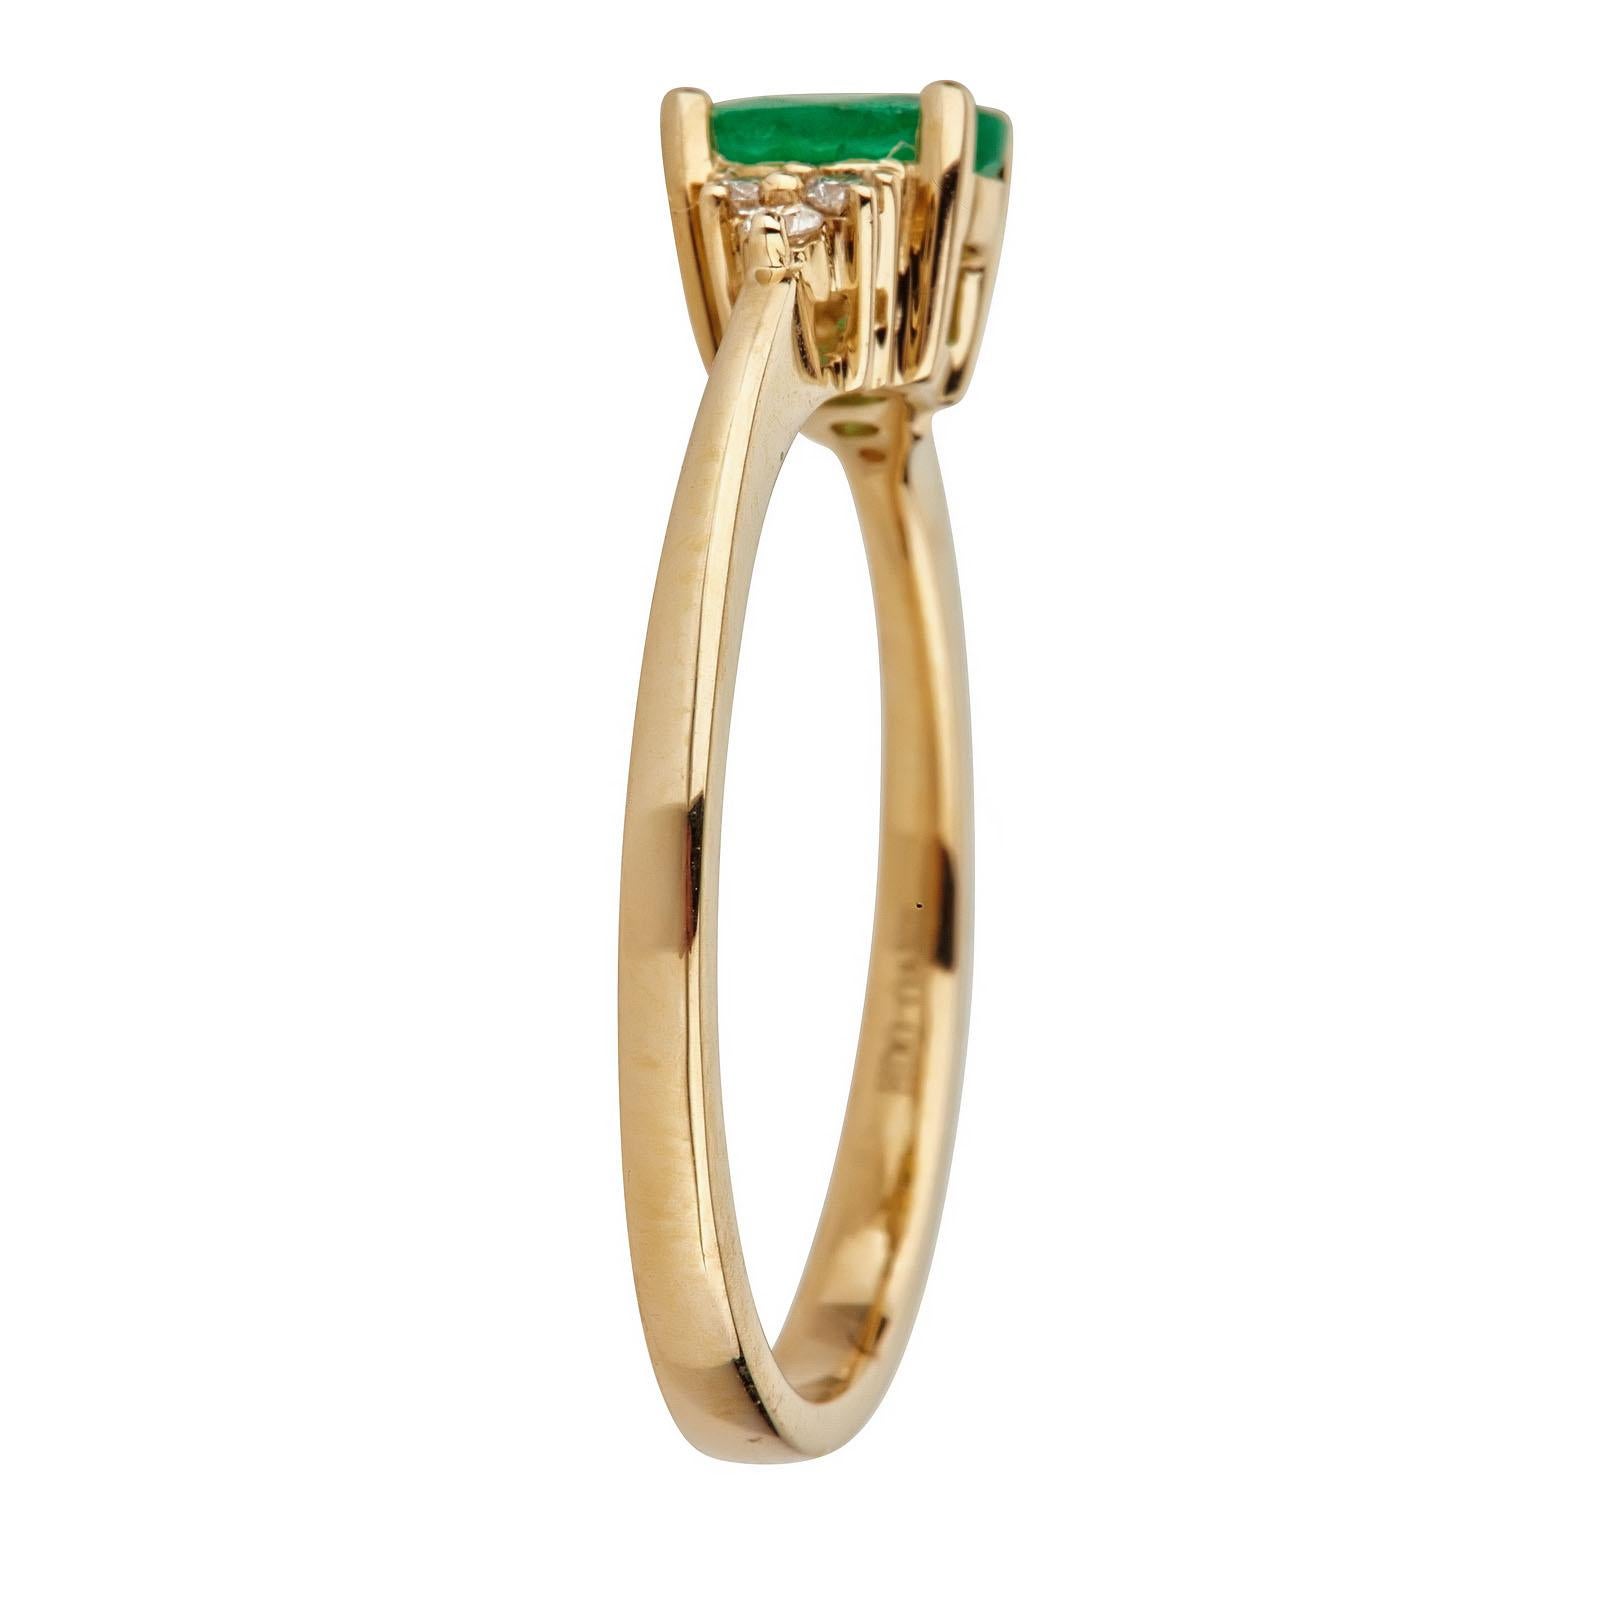 This beautiful Natural Emerald Ring is crafted in 14-karat Yellow gold and features a 0.40 carat 1 Pc Emerald with 6Pcs Round White Diamonds in GH- I1 quality with 0.07Ct in a prong-setting. 
This Ring comes in sizes 6-9, and it is a perfect gift